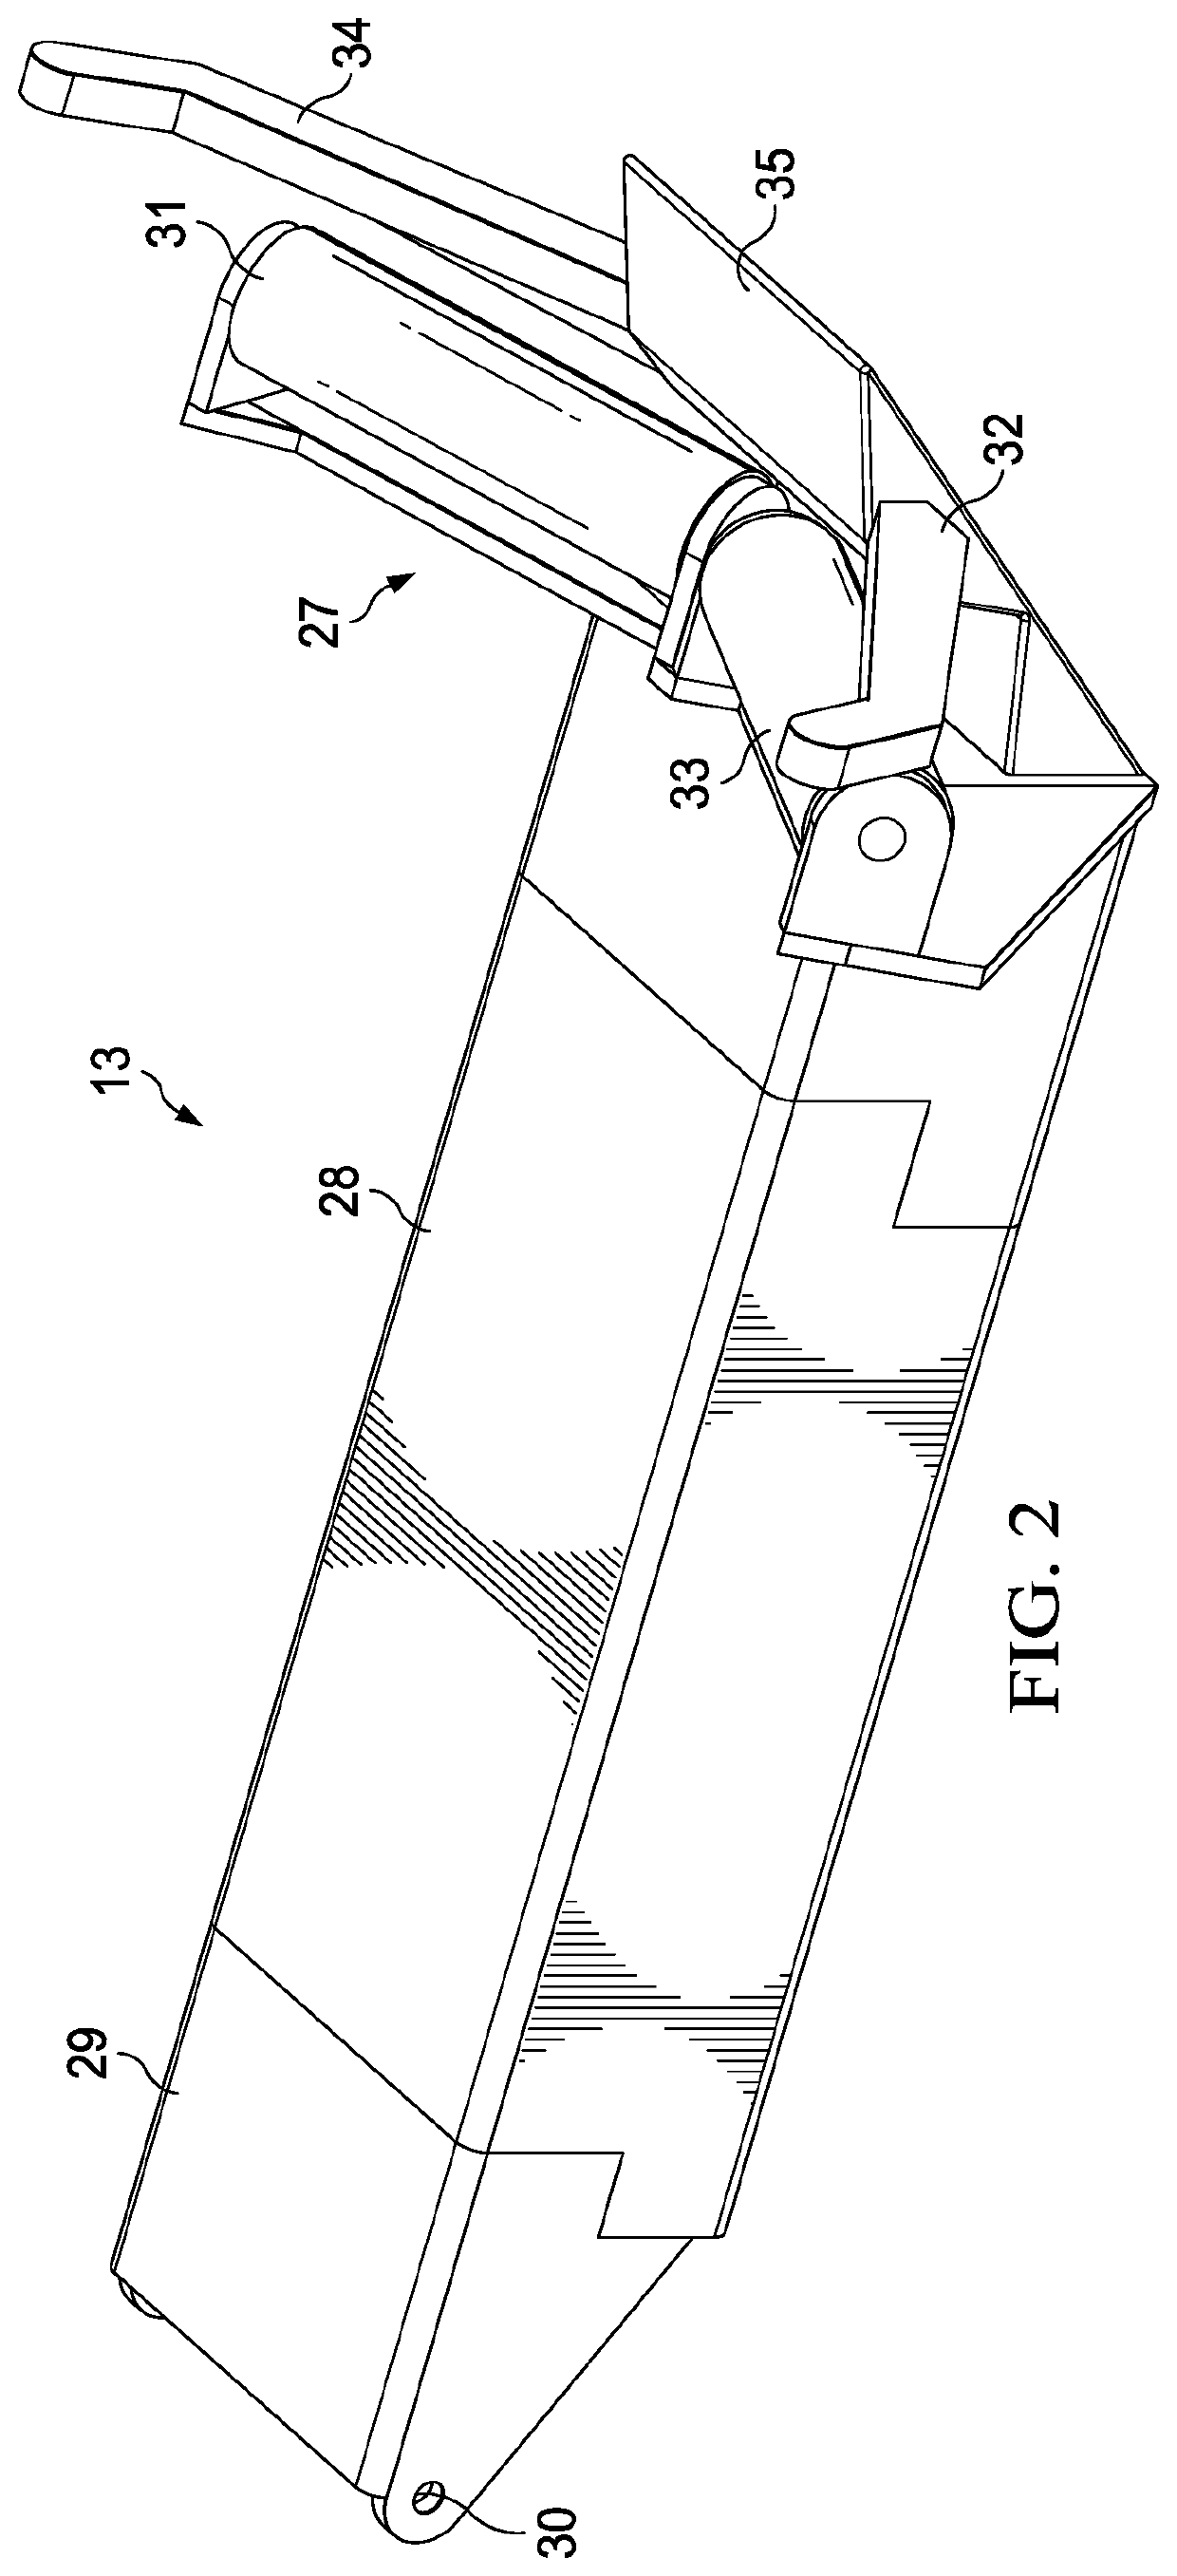 Optimized pipe handling system with quick loader arm